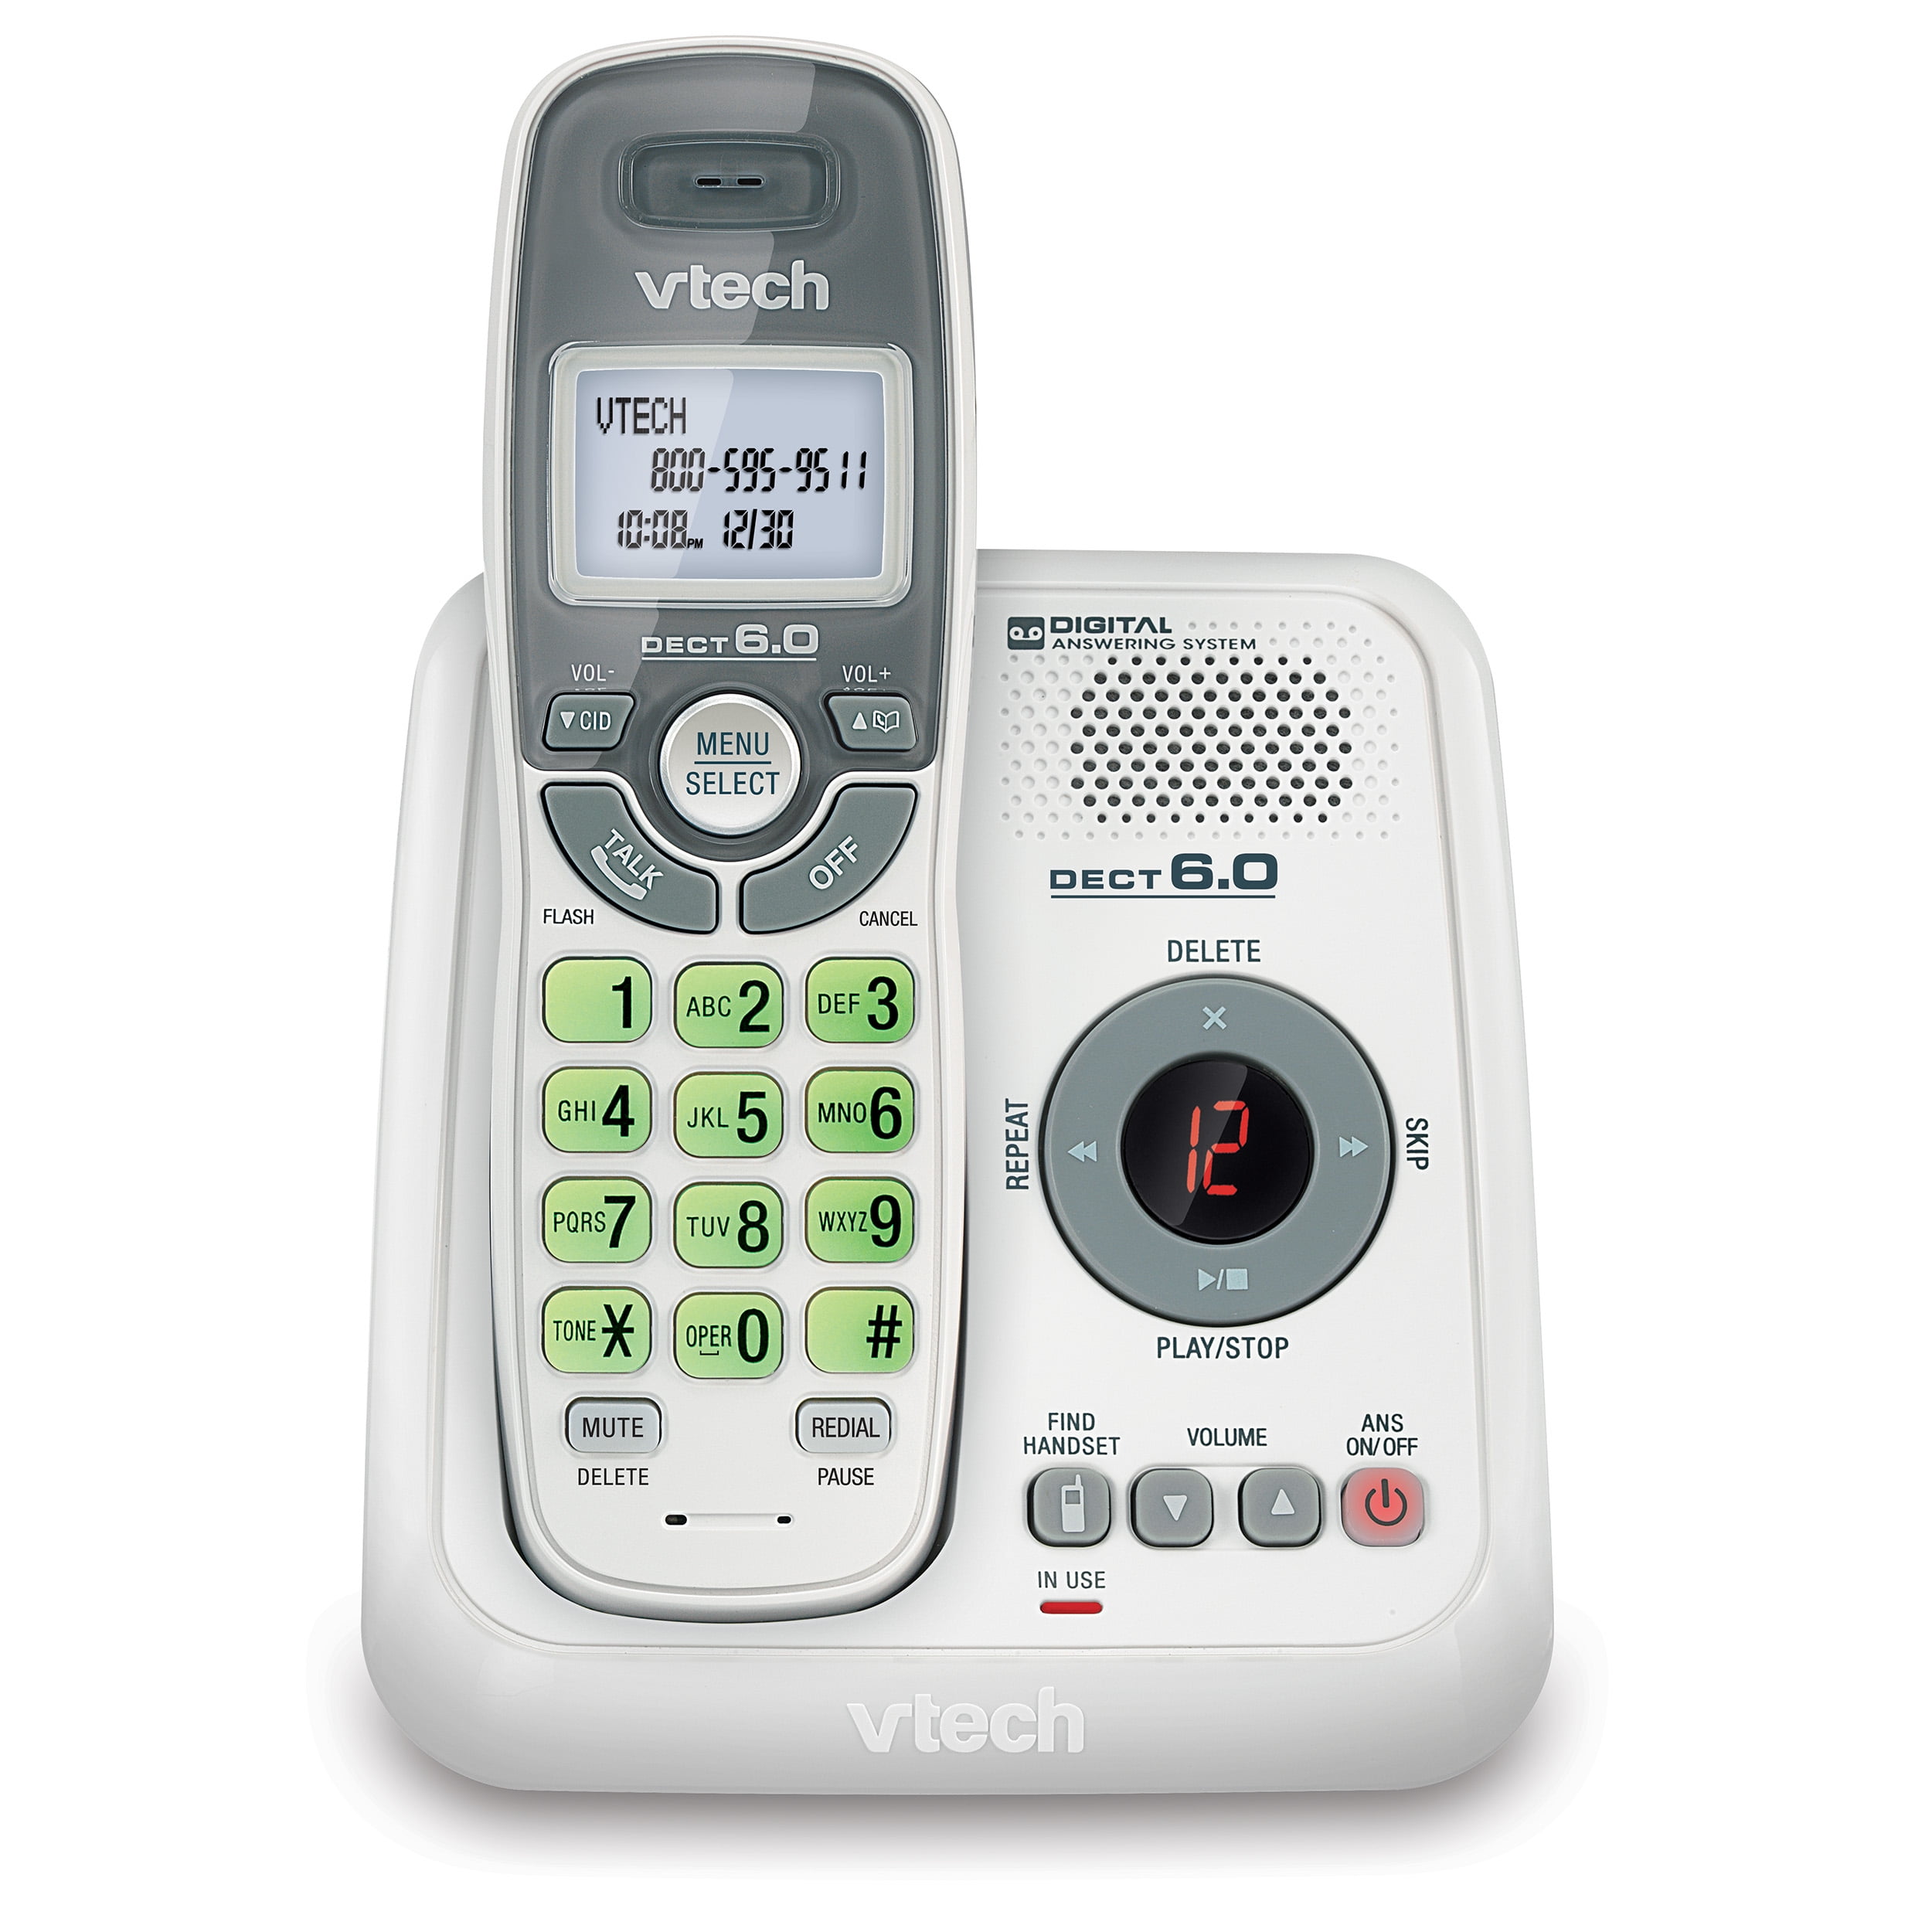 NEW Vtech DECT 6.0 Cordless Home Phone Telephone 4-System 